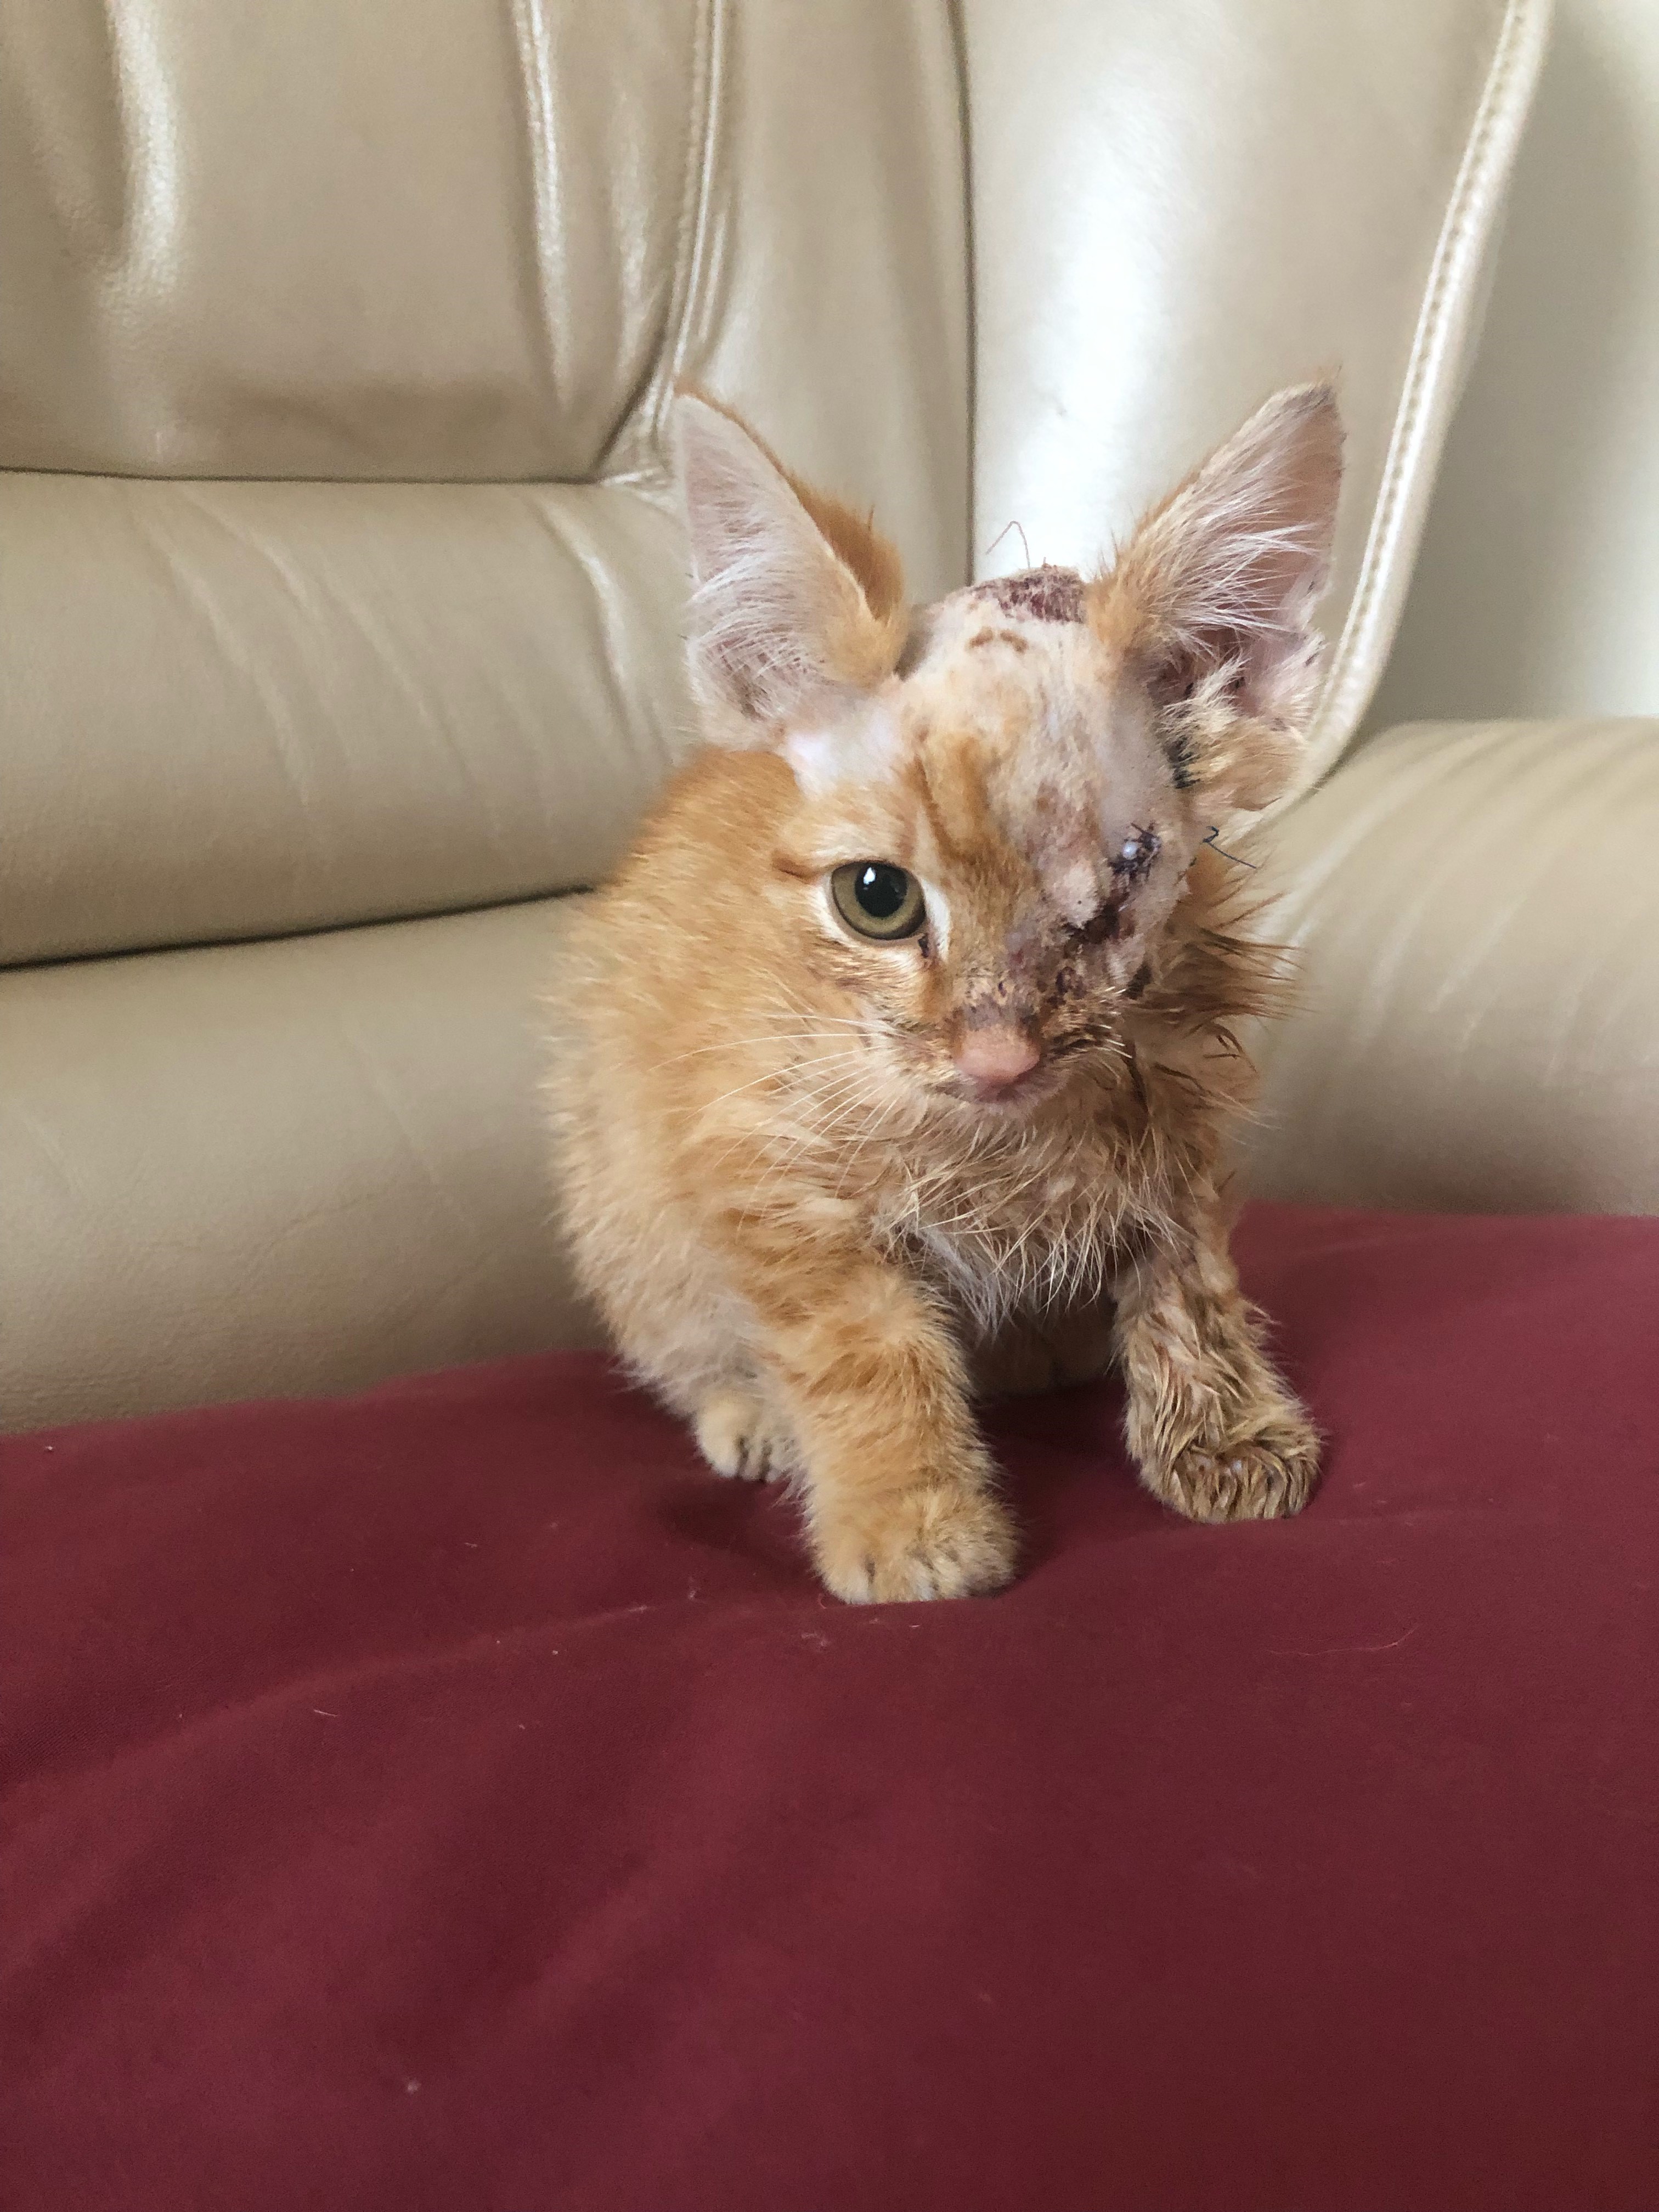 Pirate the kitten after surgery